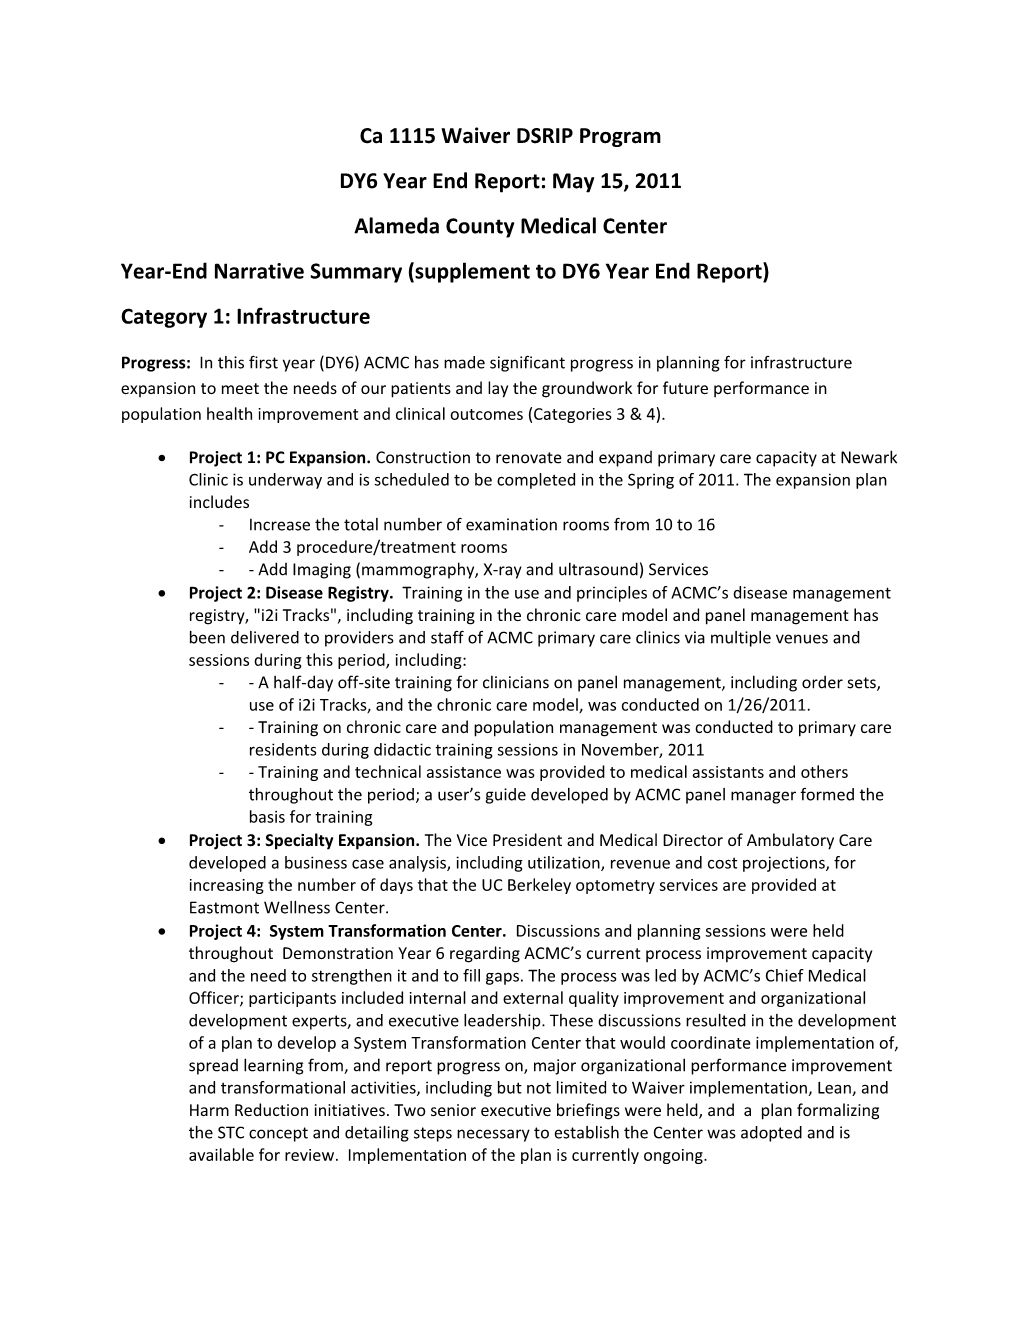 DY 6 Supplemental Year-End Narrative